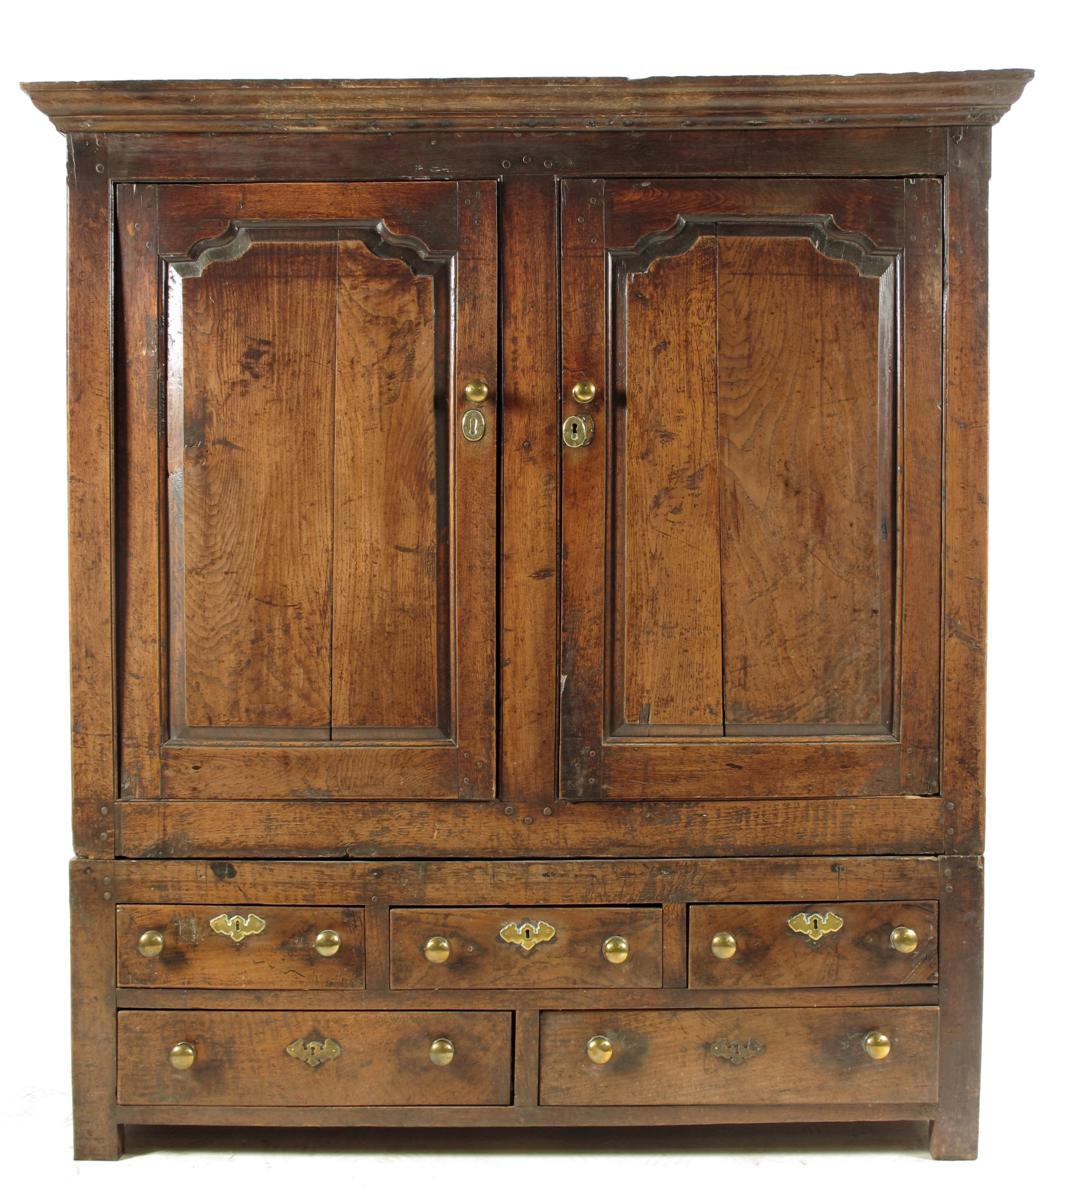 An oak cupboard on stand, with a later cornice above a pair of fielded oak panel doors revealing